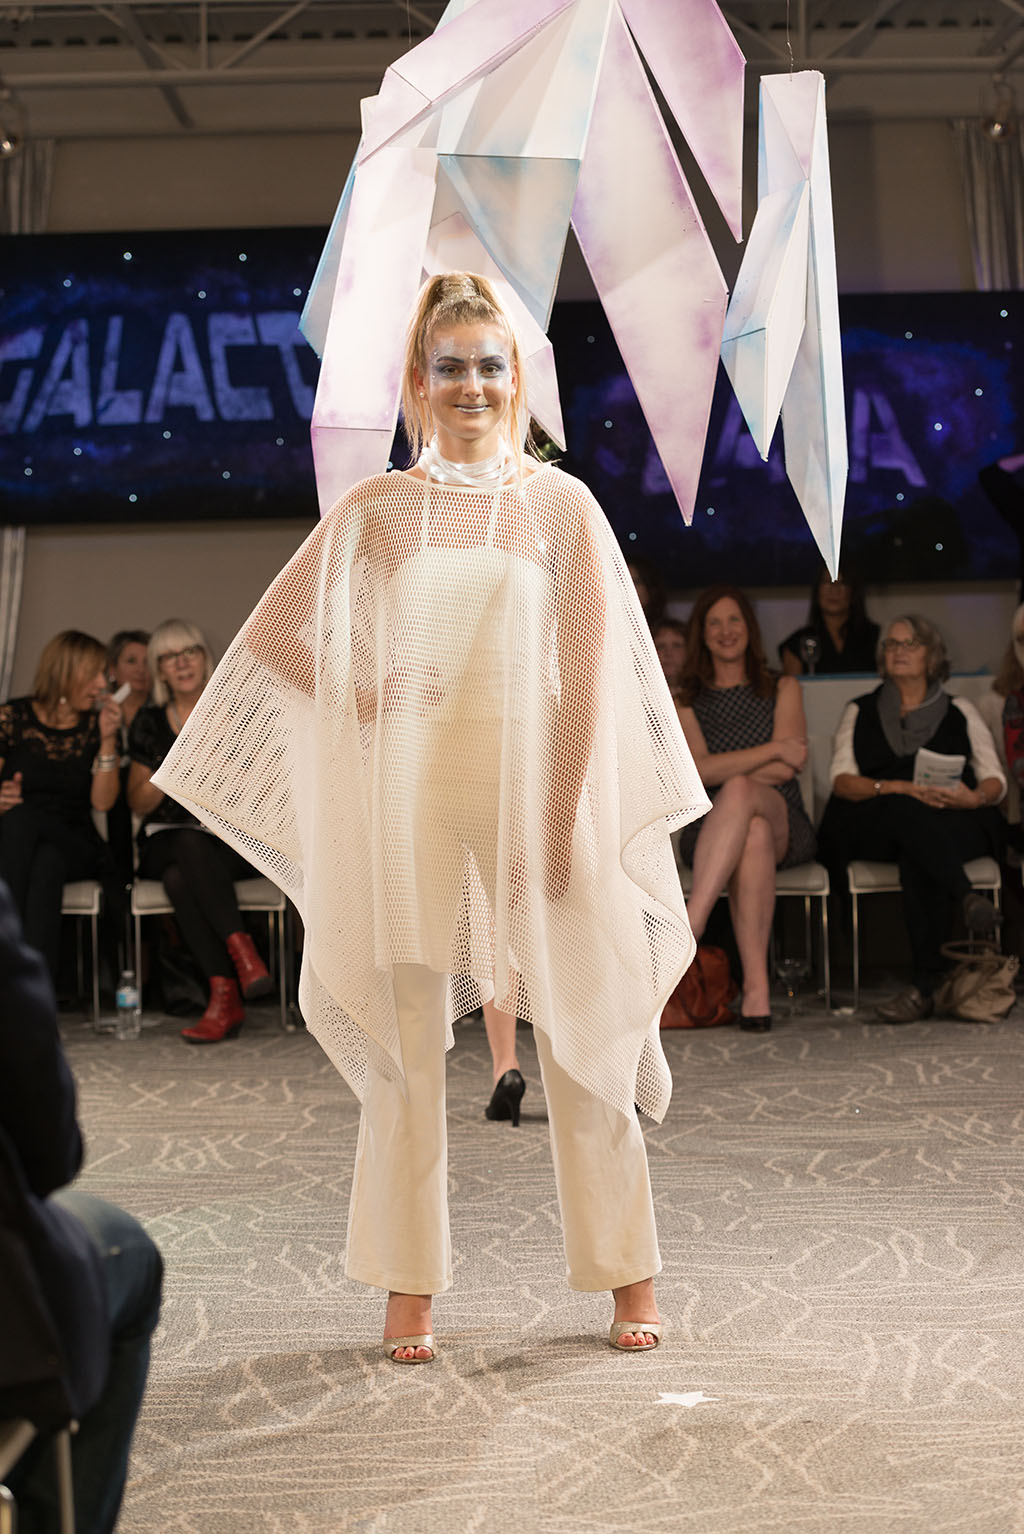 Photo from the Galactic Gala fashion show